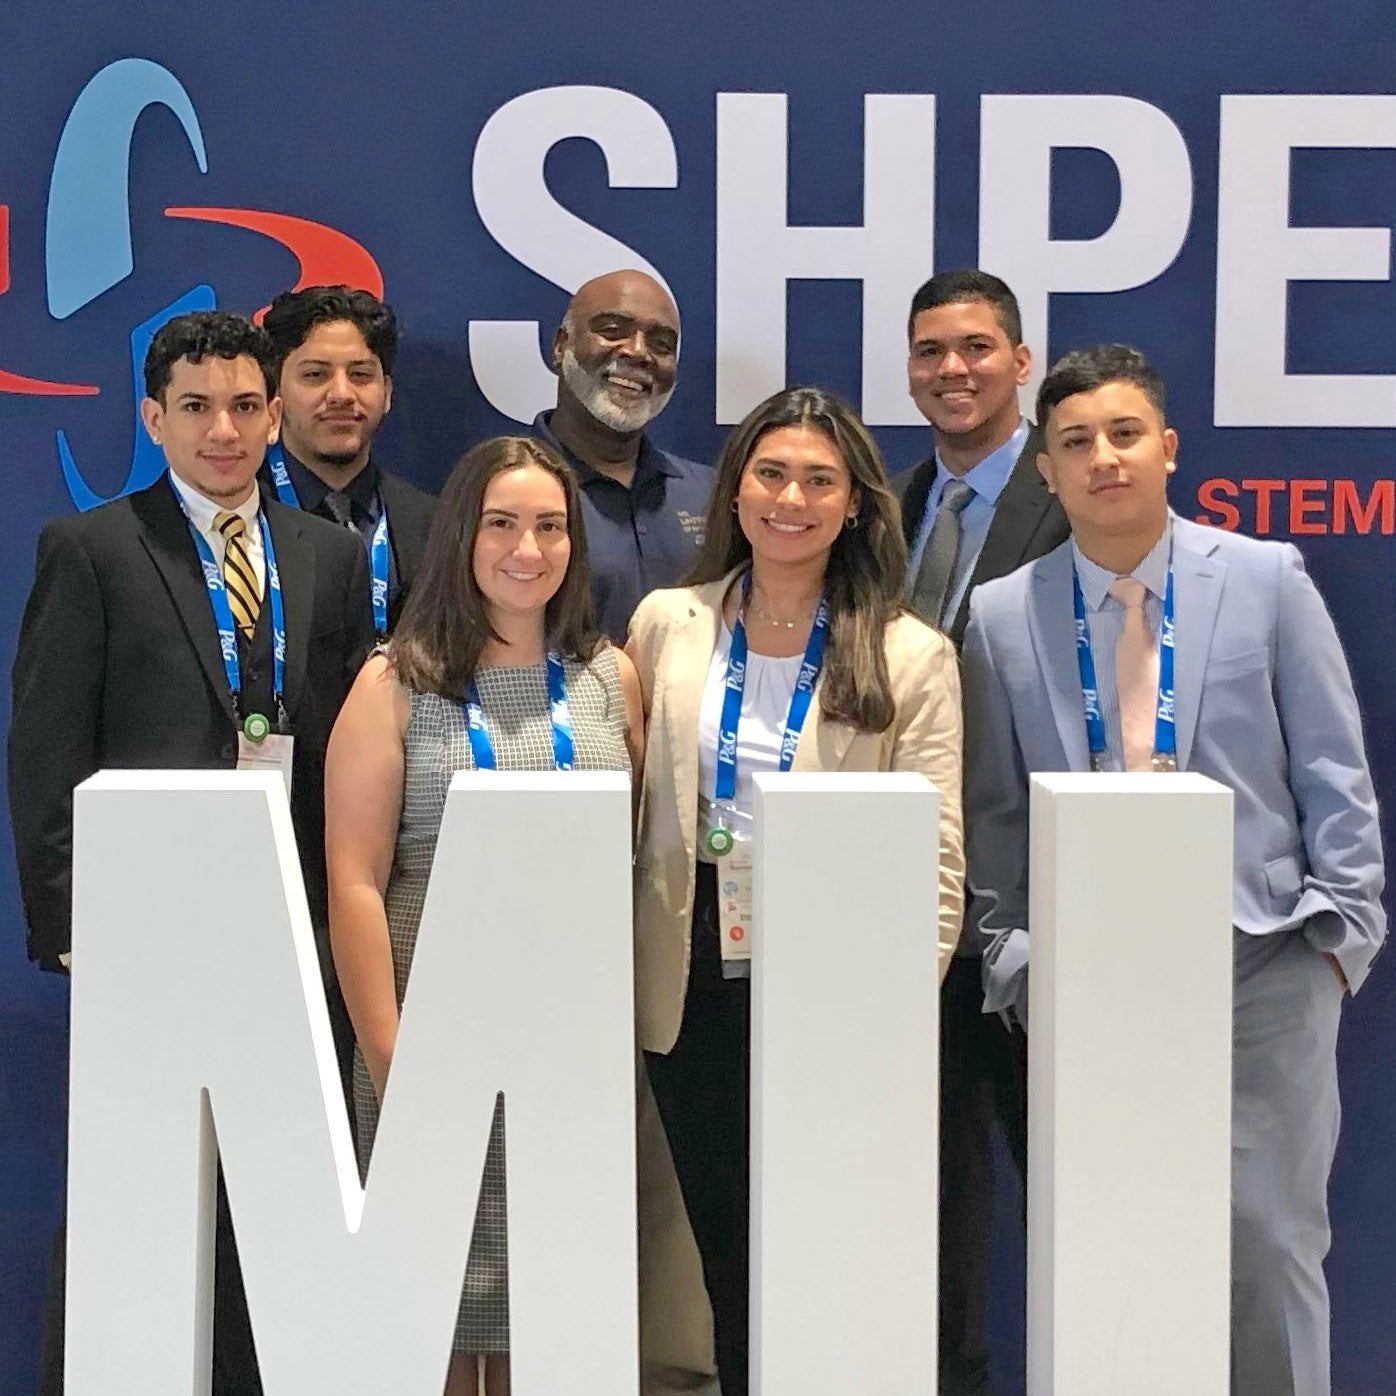 SHPE Convention Leads to Interviews and Job Offers for URI Students